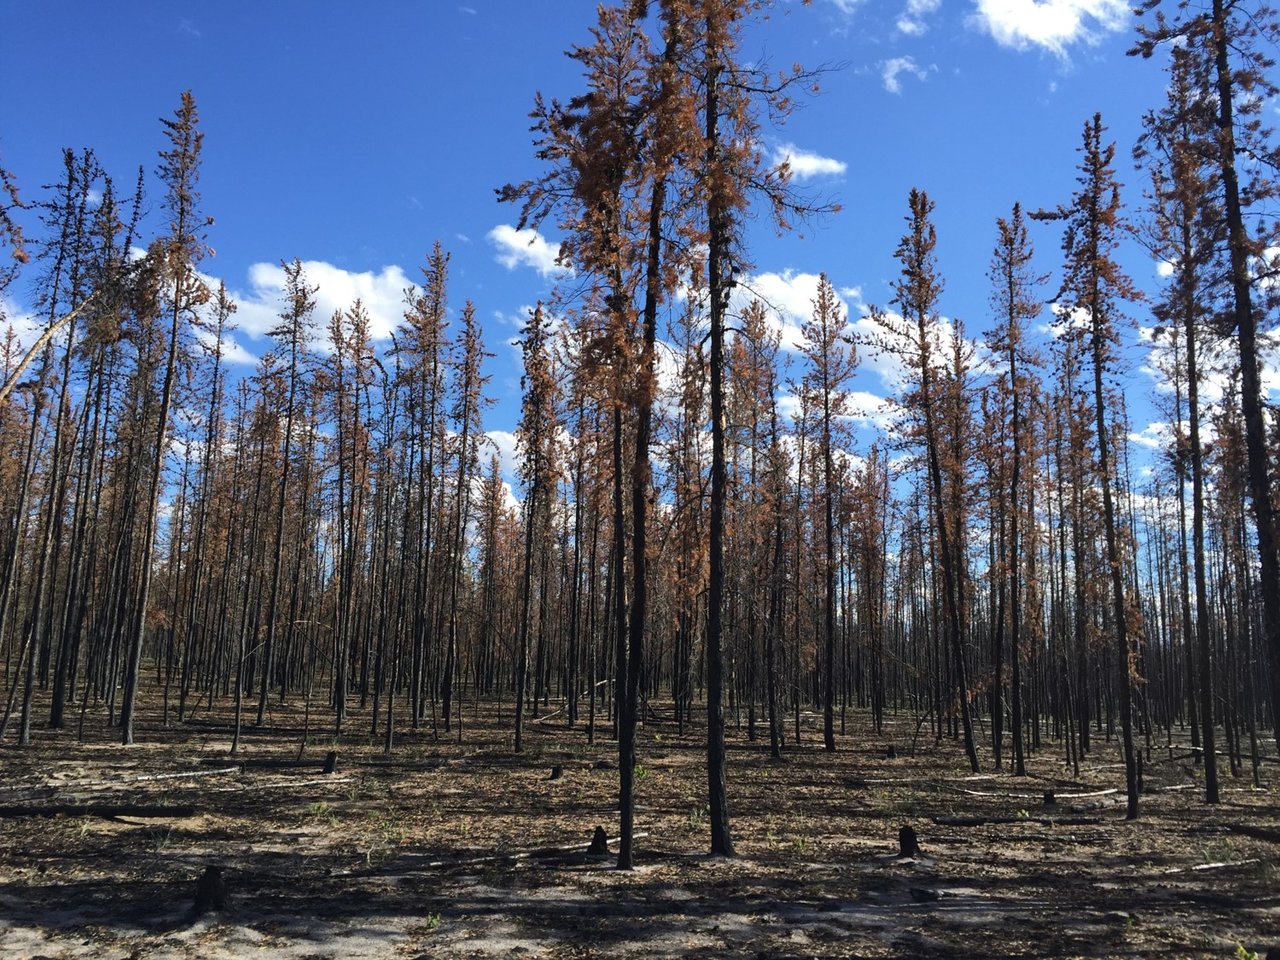 Burned trees stand in front of a vivid blue sky.